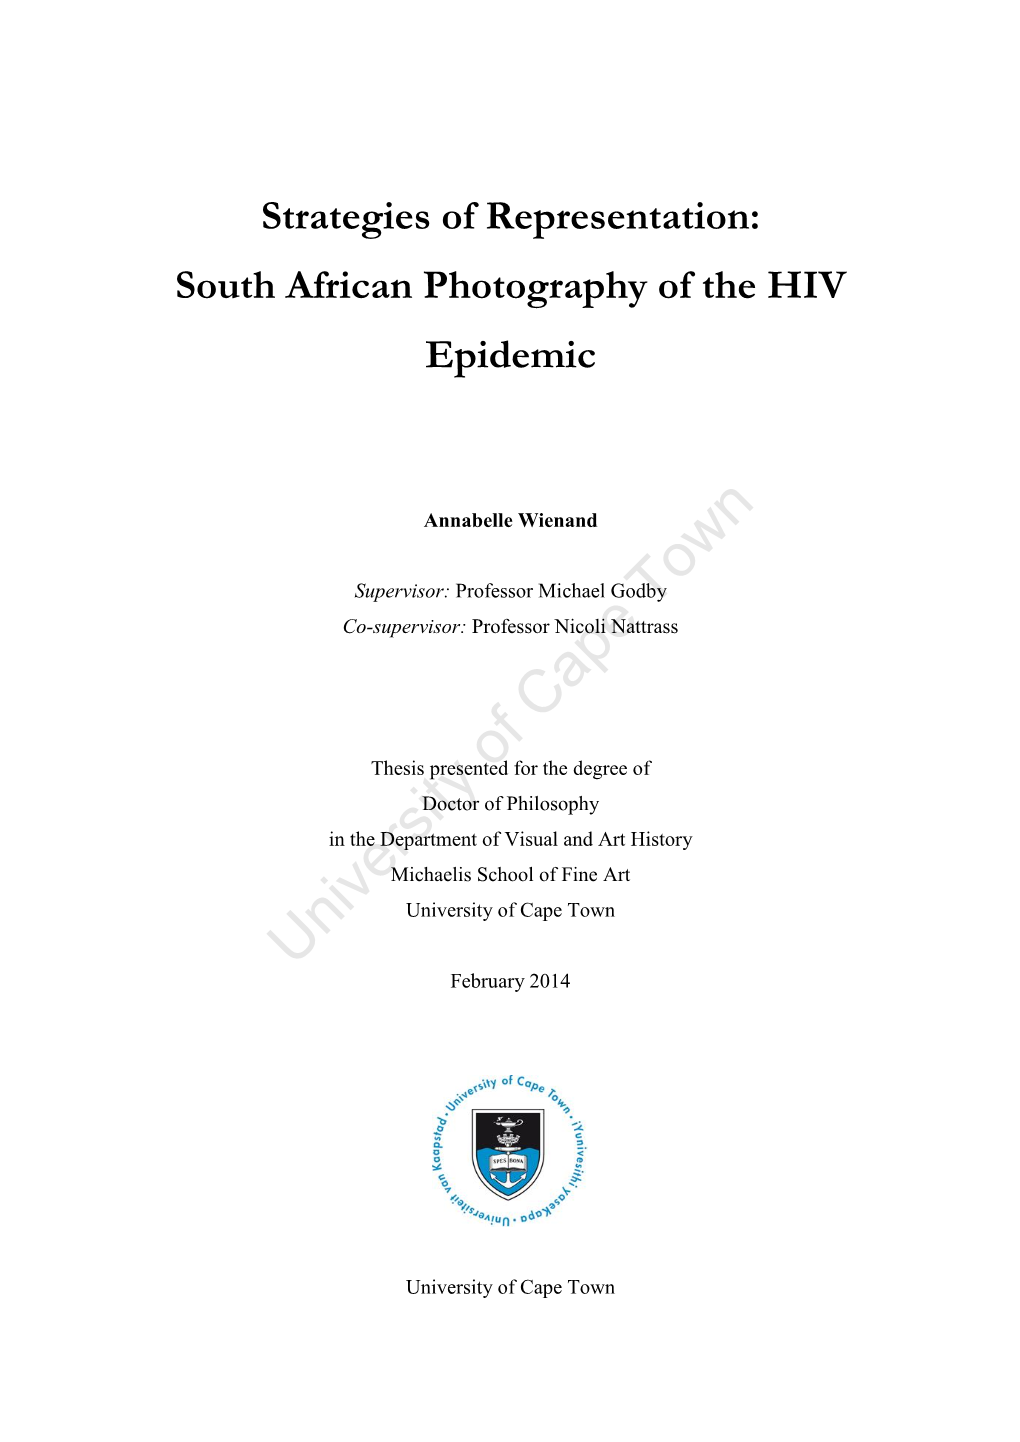 South African Photography of the HIV Epidemic